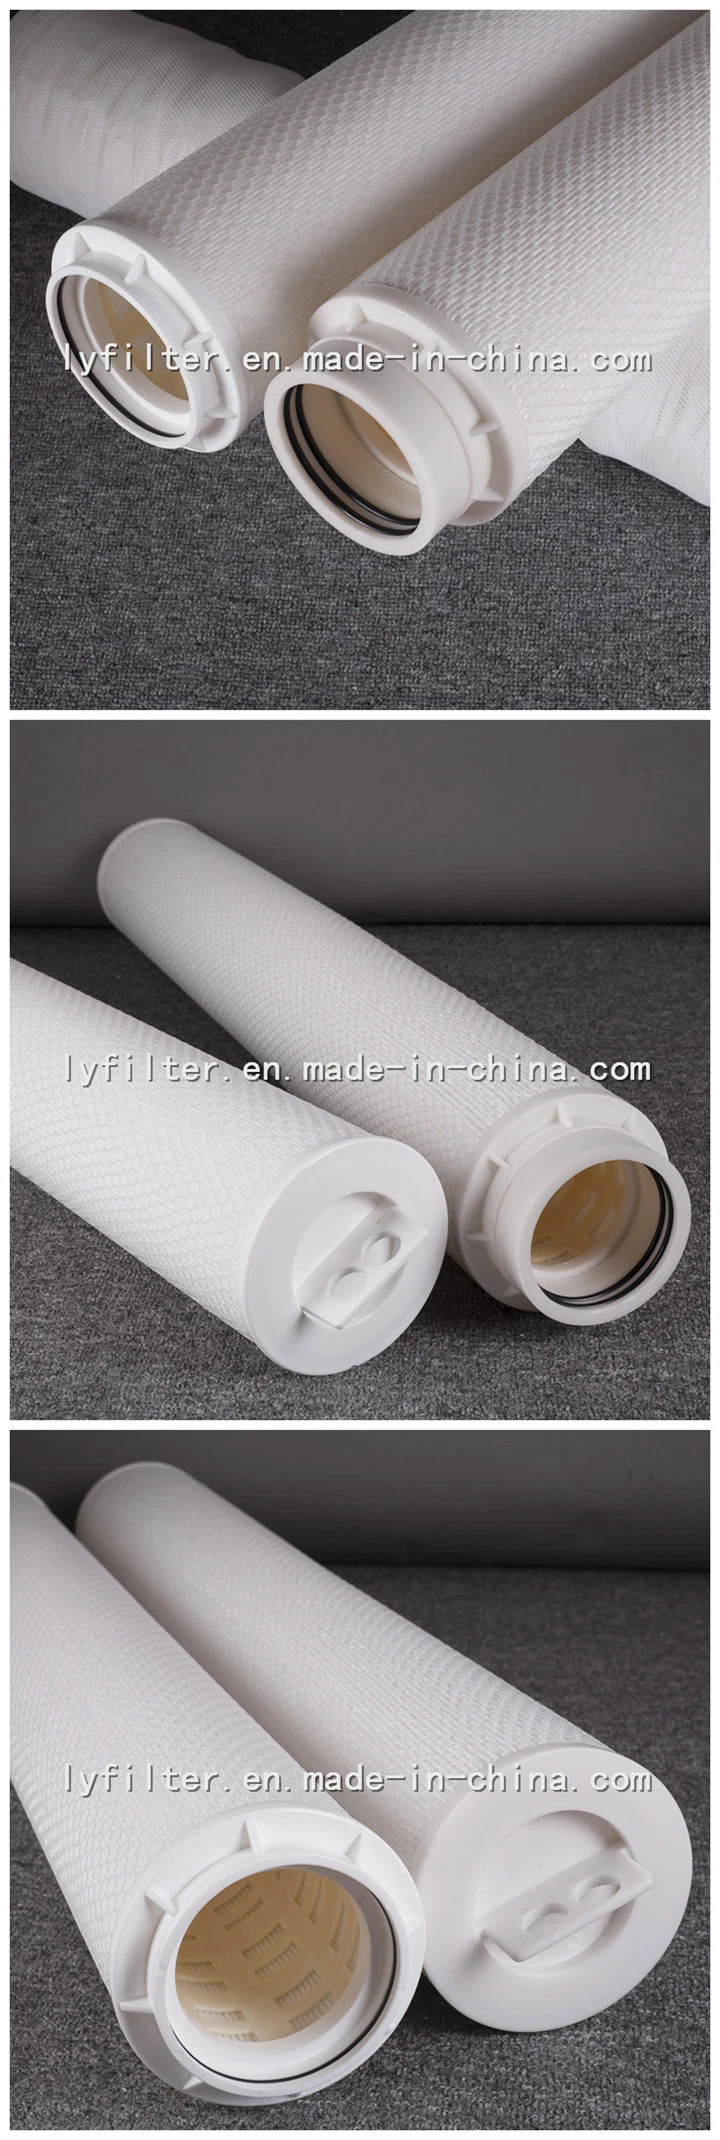 Industrial High Flow Rate Liquid Filter Cartridge for Sea Water Treatment